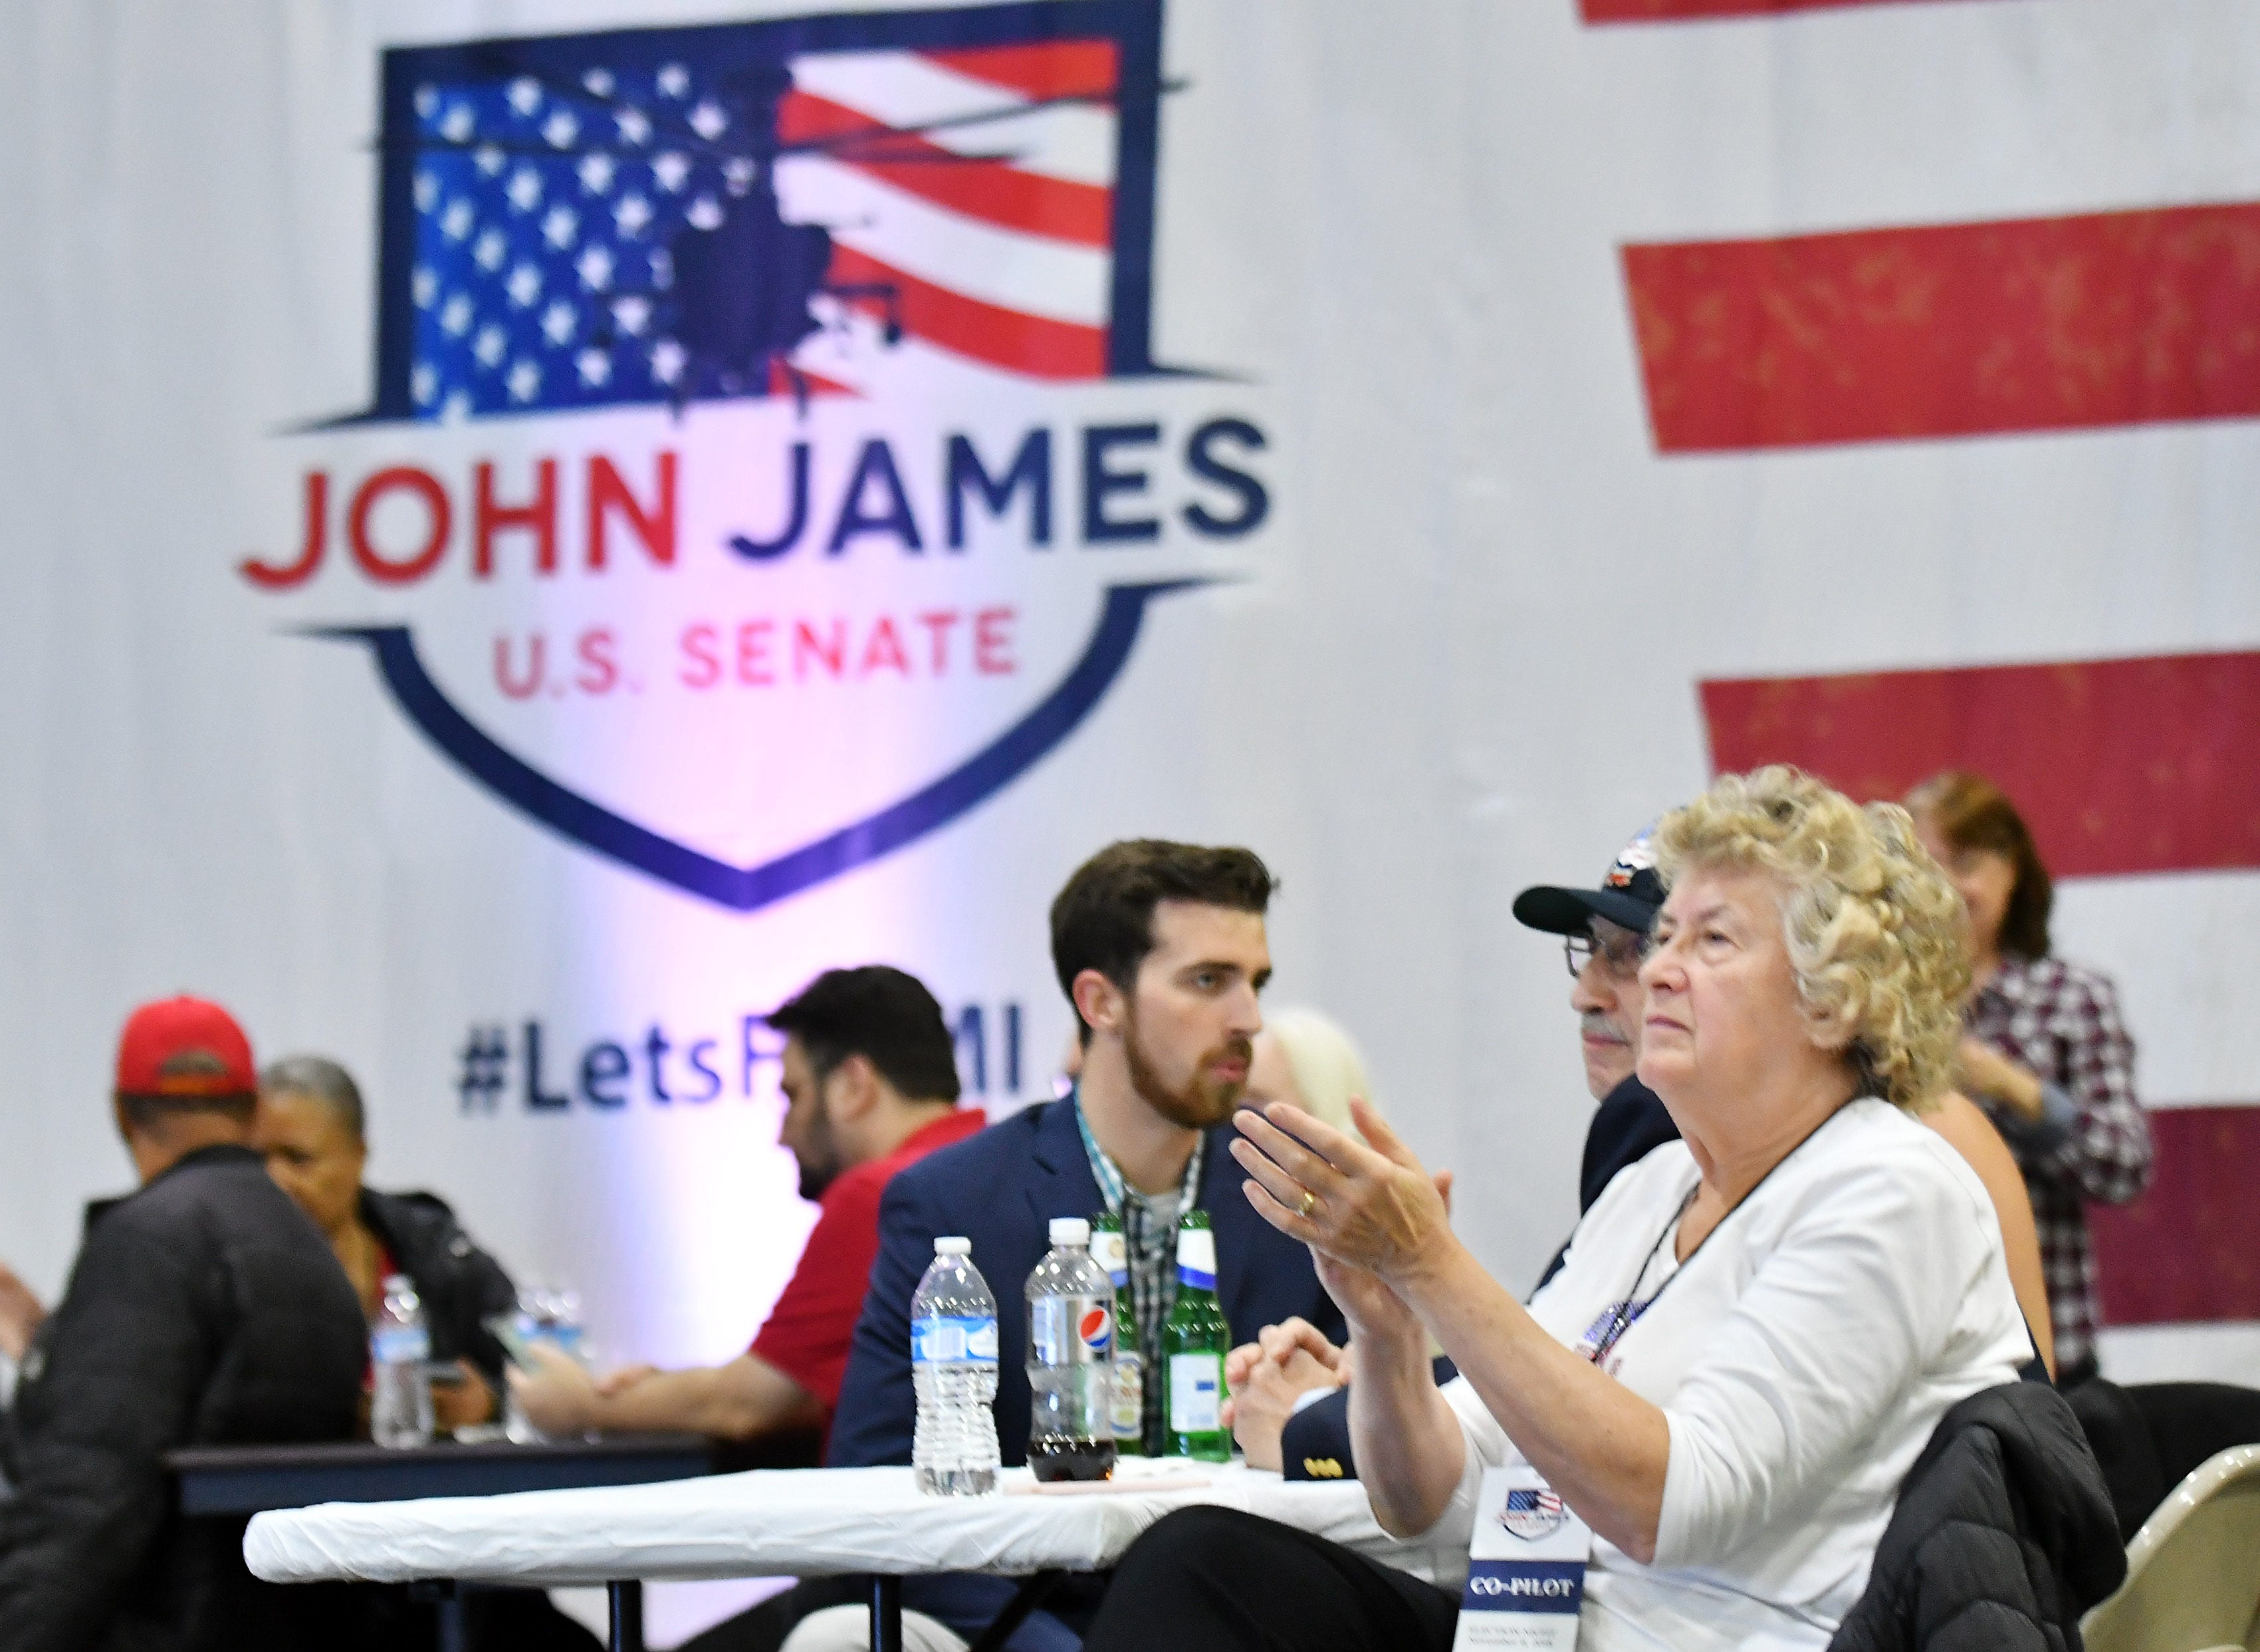 Nancy Corsett of Lexington applauds as early results are shown on television at the election night party for U.S. Senate Republican candidate John James at James Group International in Detroit Tuesday night.